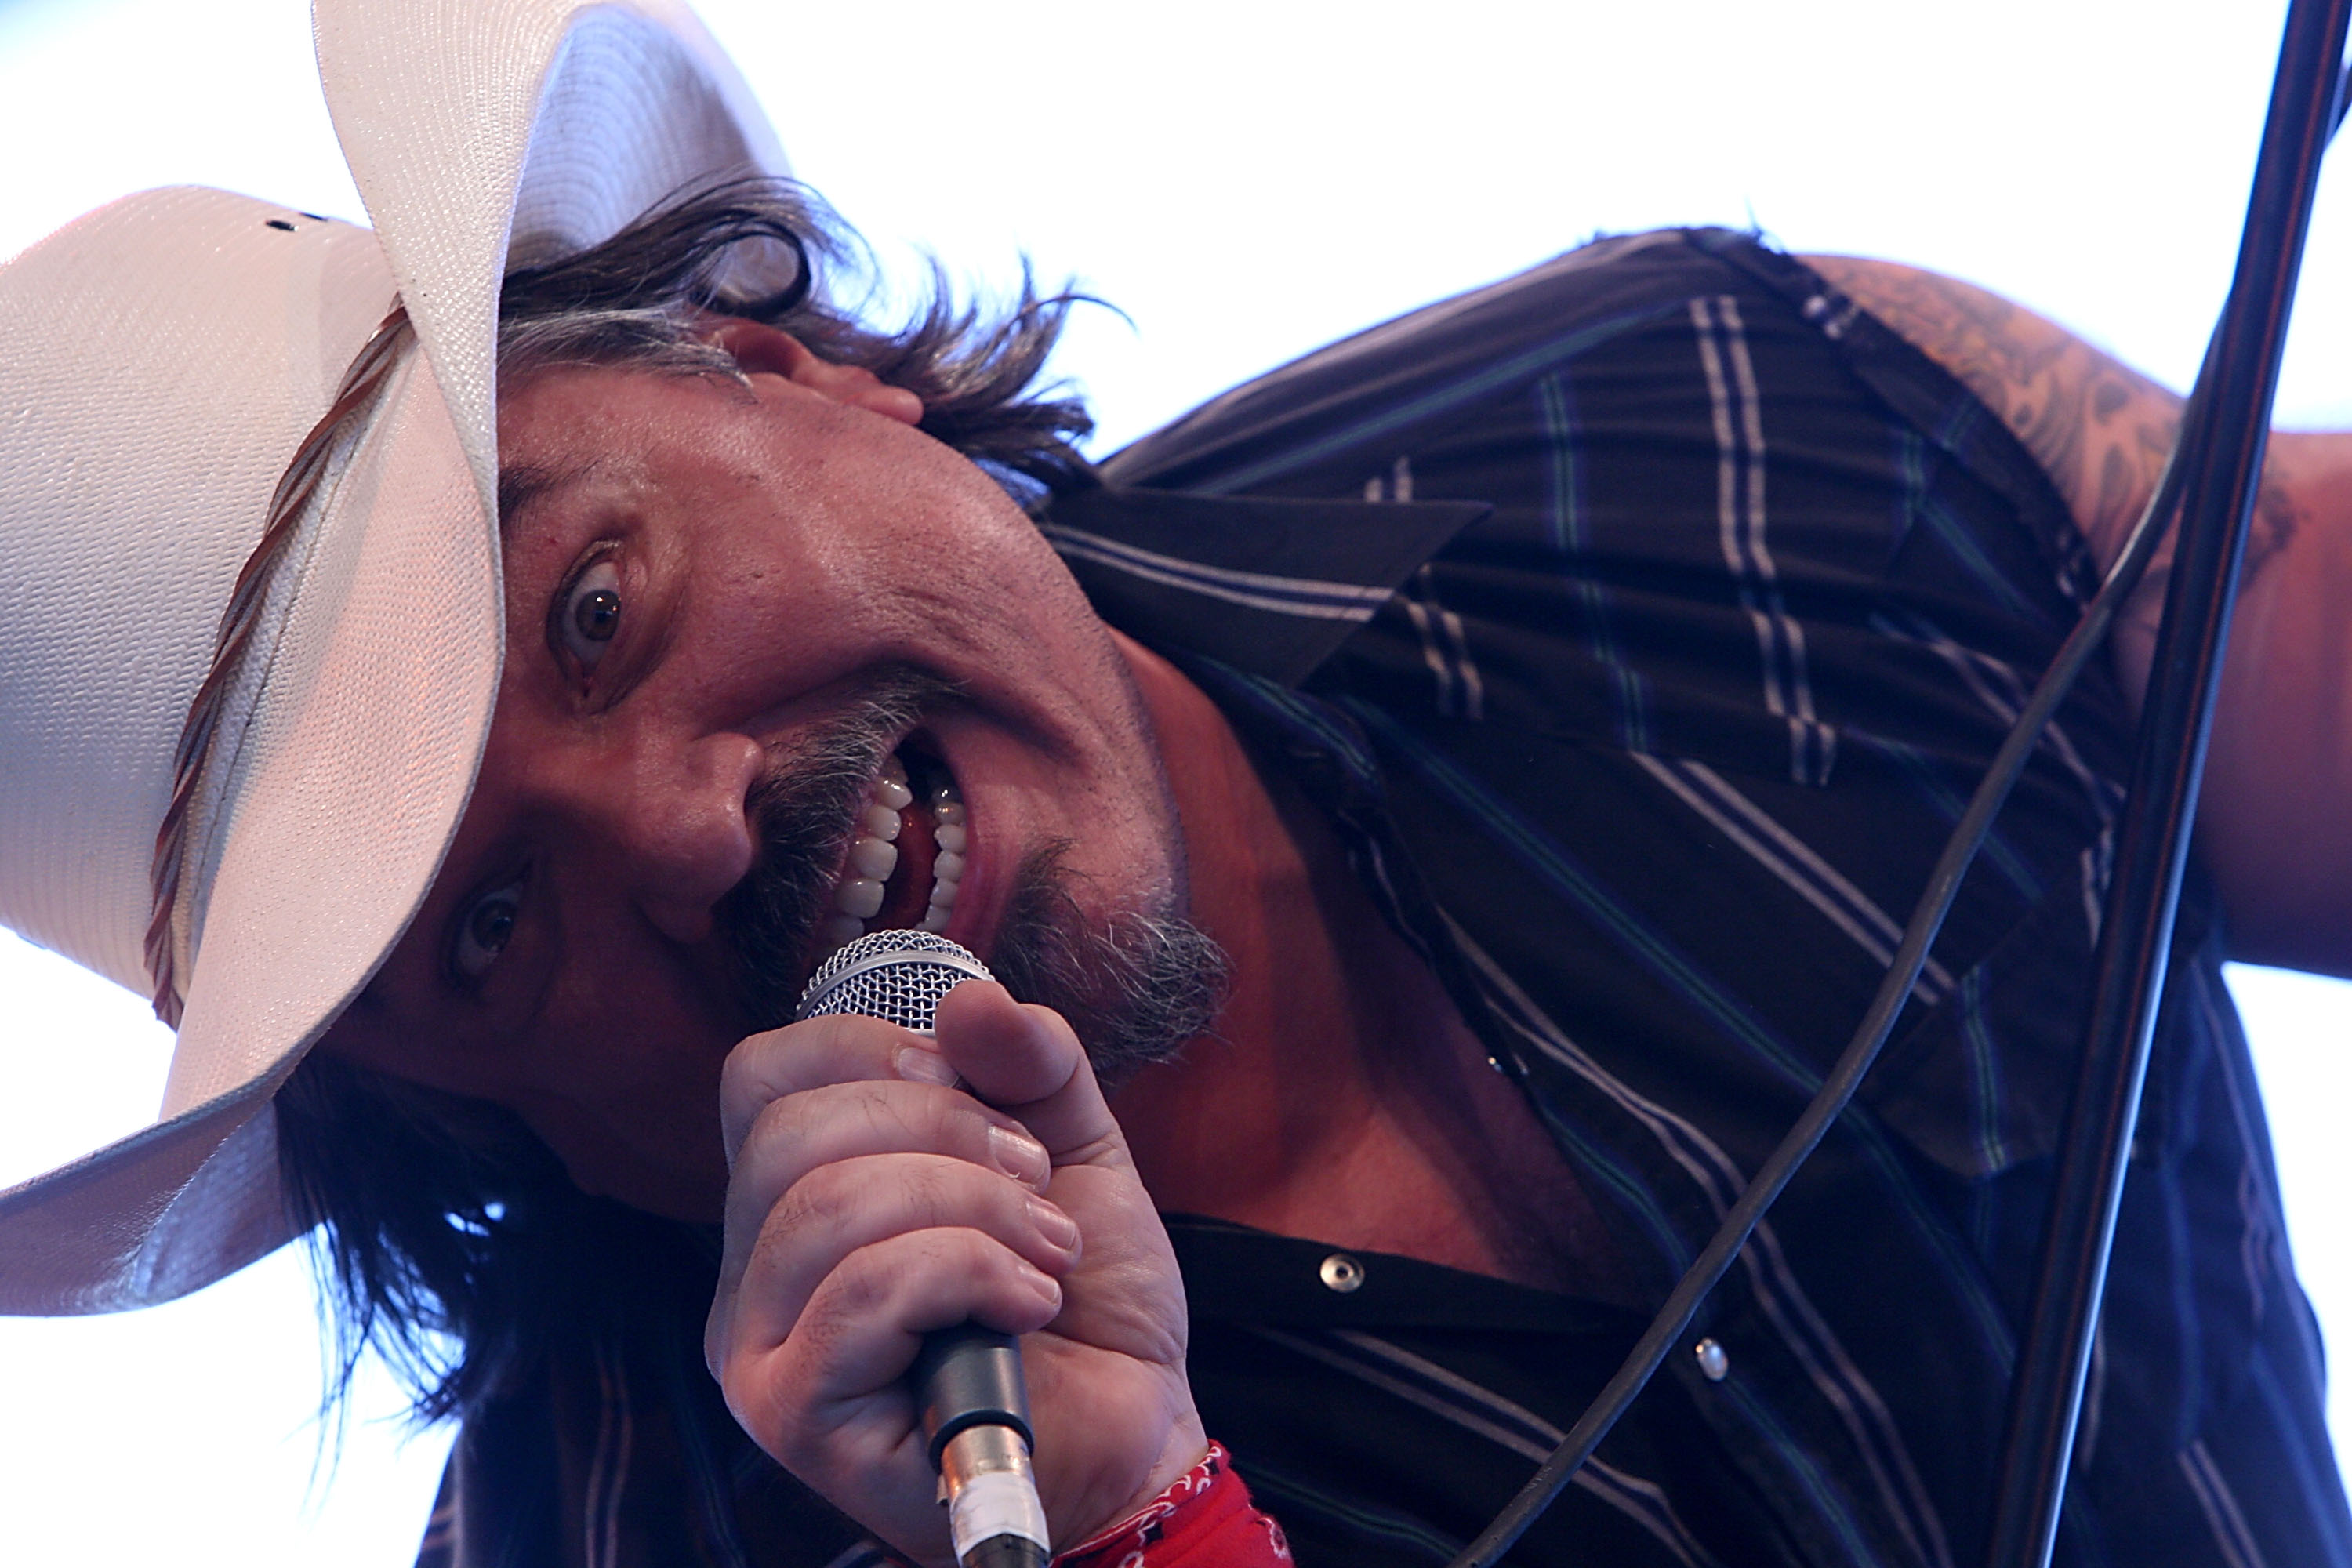 W. Earl Brown performing at Stagecoach with the Sacred Cowboys in 2009